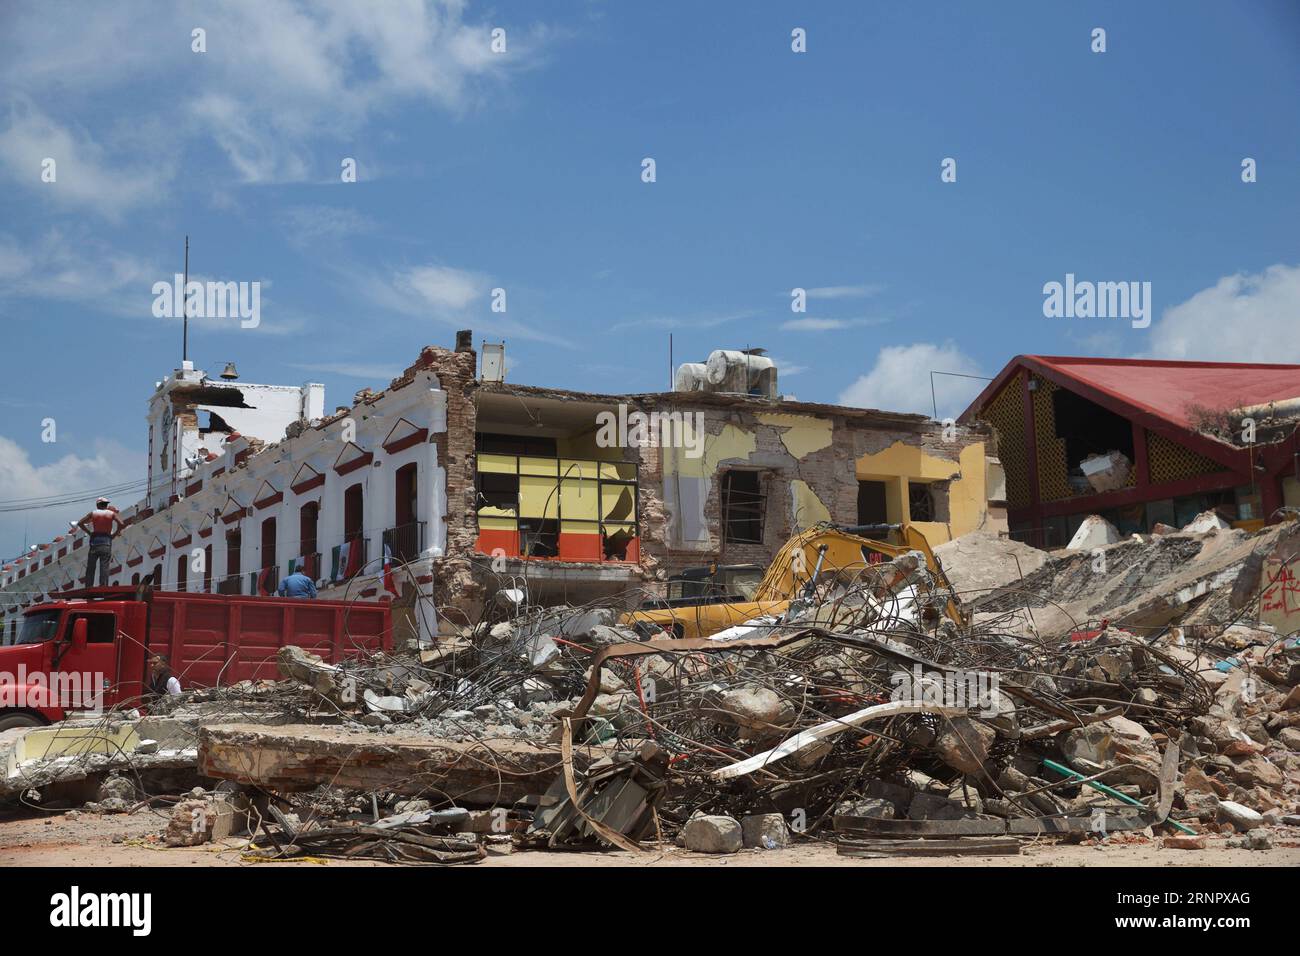 (170910) -- JUCHITAN (MEXICO), Sept. 10, 2017 -- A building collapse site is seen after an earthquake hit in Juchitan, Oaxaca state, Mexico, Sept. 9, 2017. A powerful earthquake measuring 8.2 on the Richter scale struck off Mexico s southern coast late Thursday night, killing 90 people. ) MEXICO-OAXACA-JUCHITAN-EARTHQUAKE DanxHang PUBLICATIONxNOTxINxCHN Stock Photo